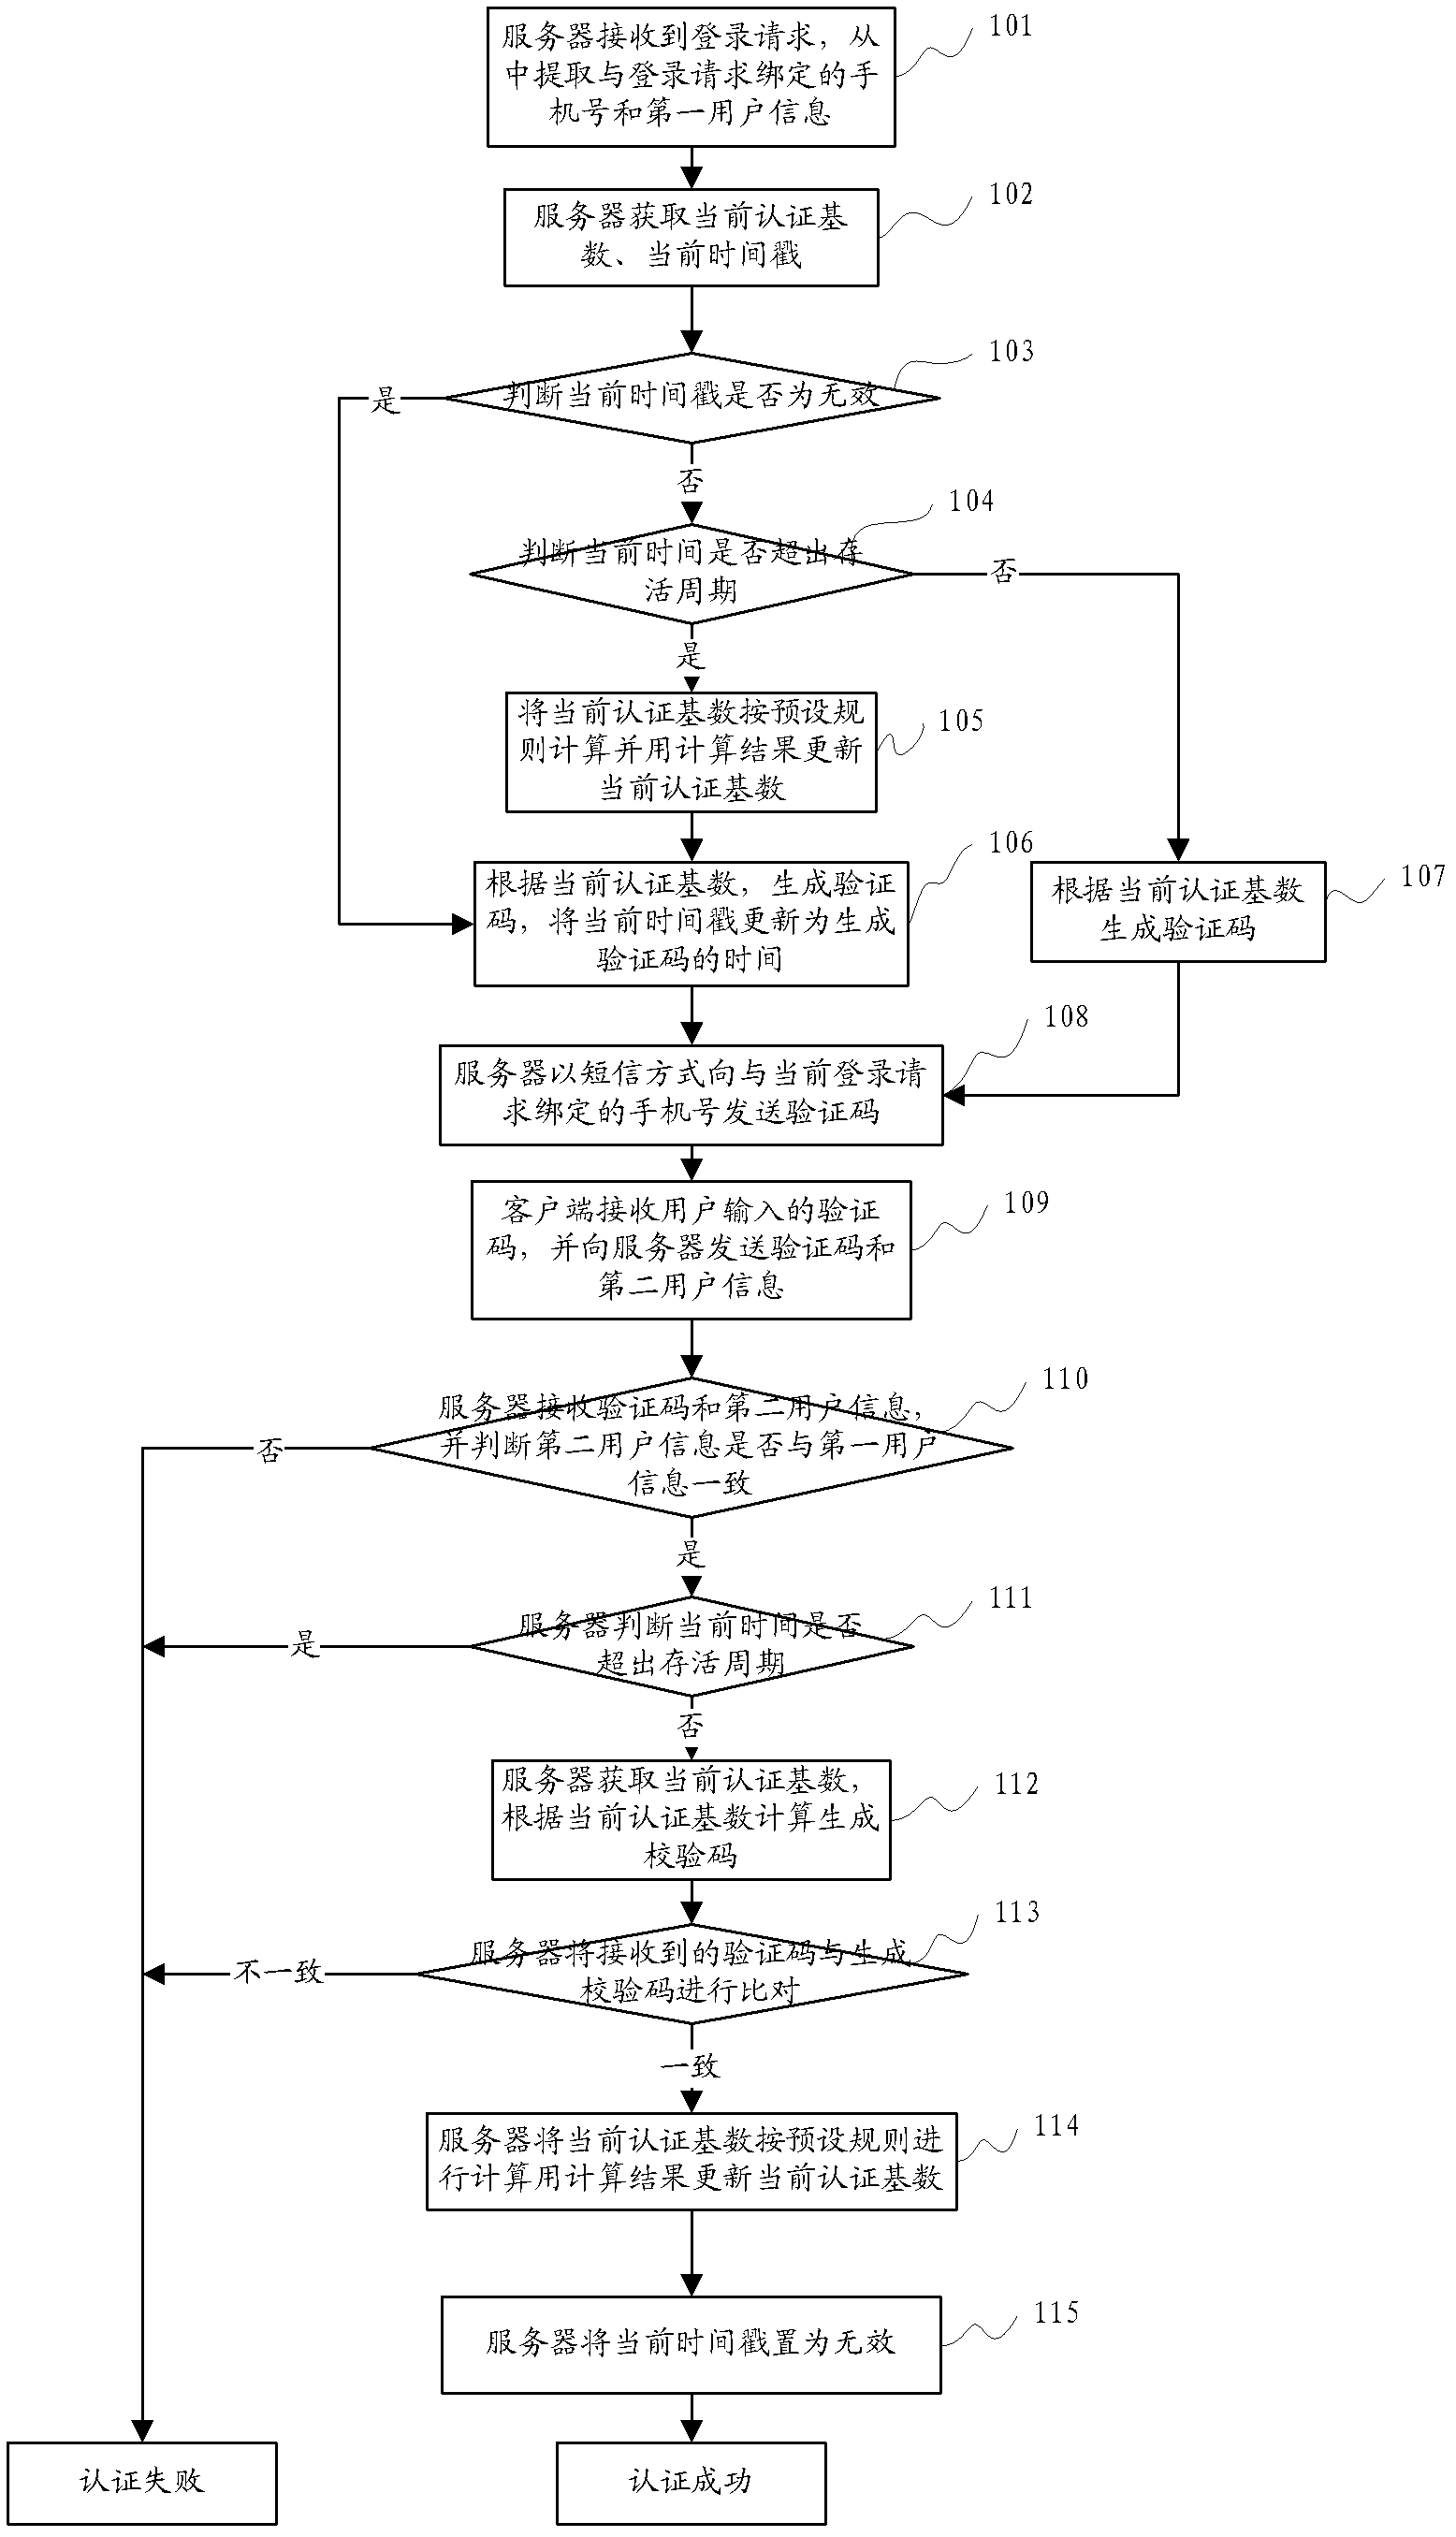 A SMS-based authentication method, system and device